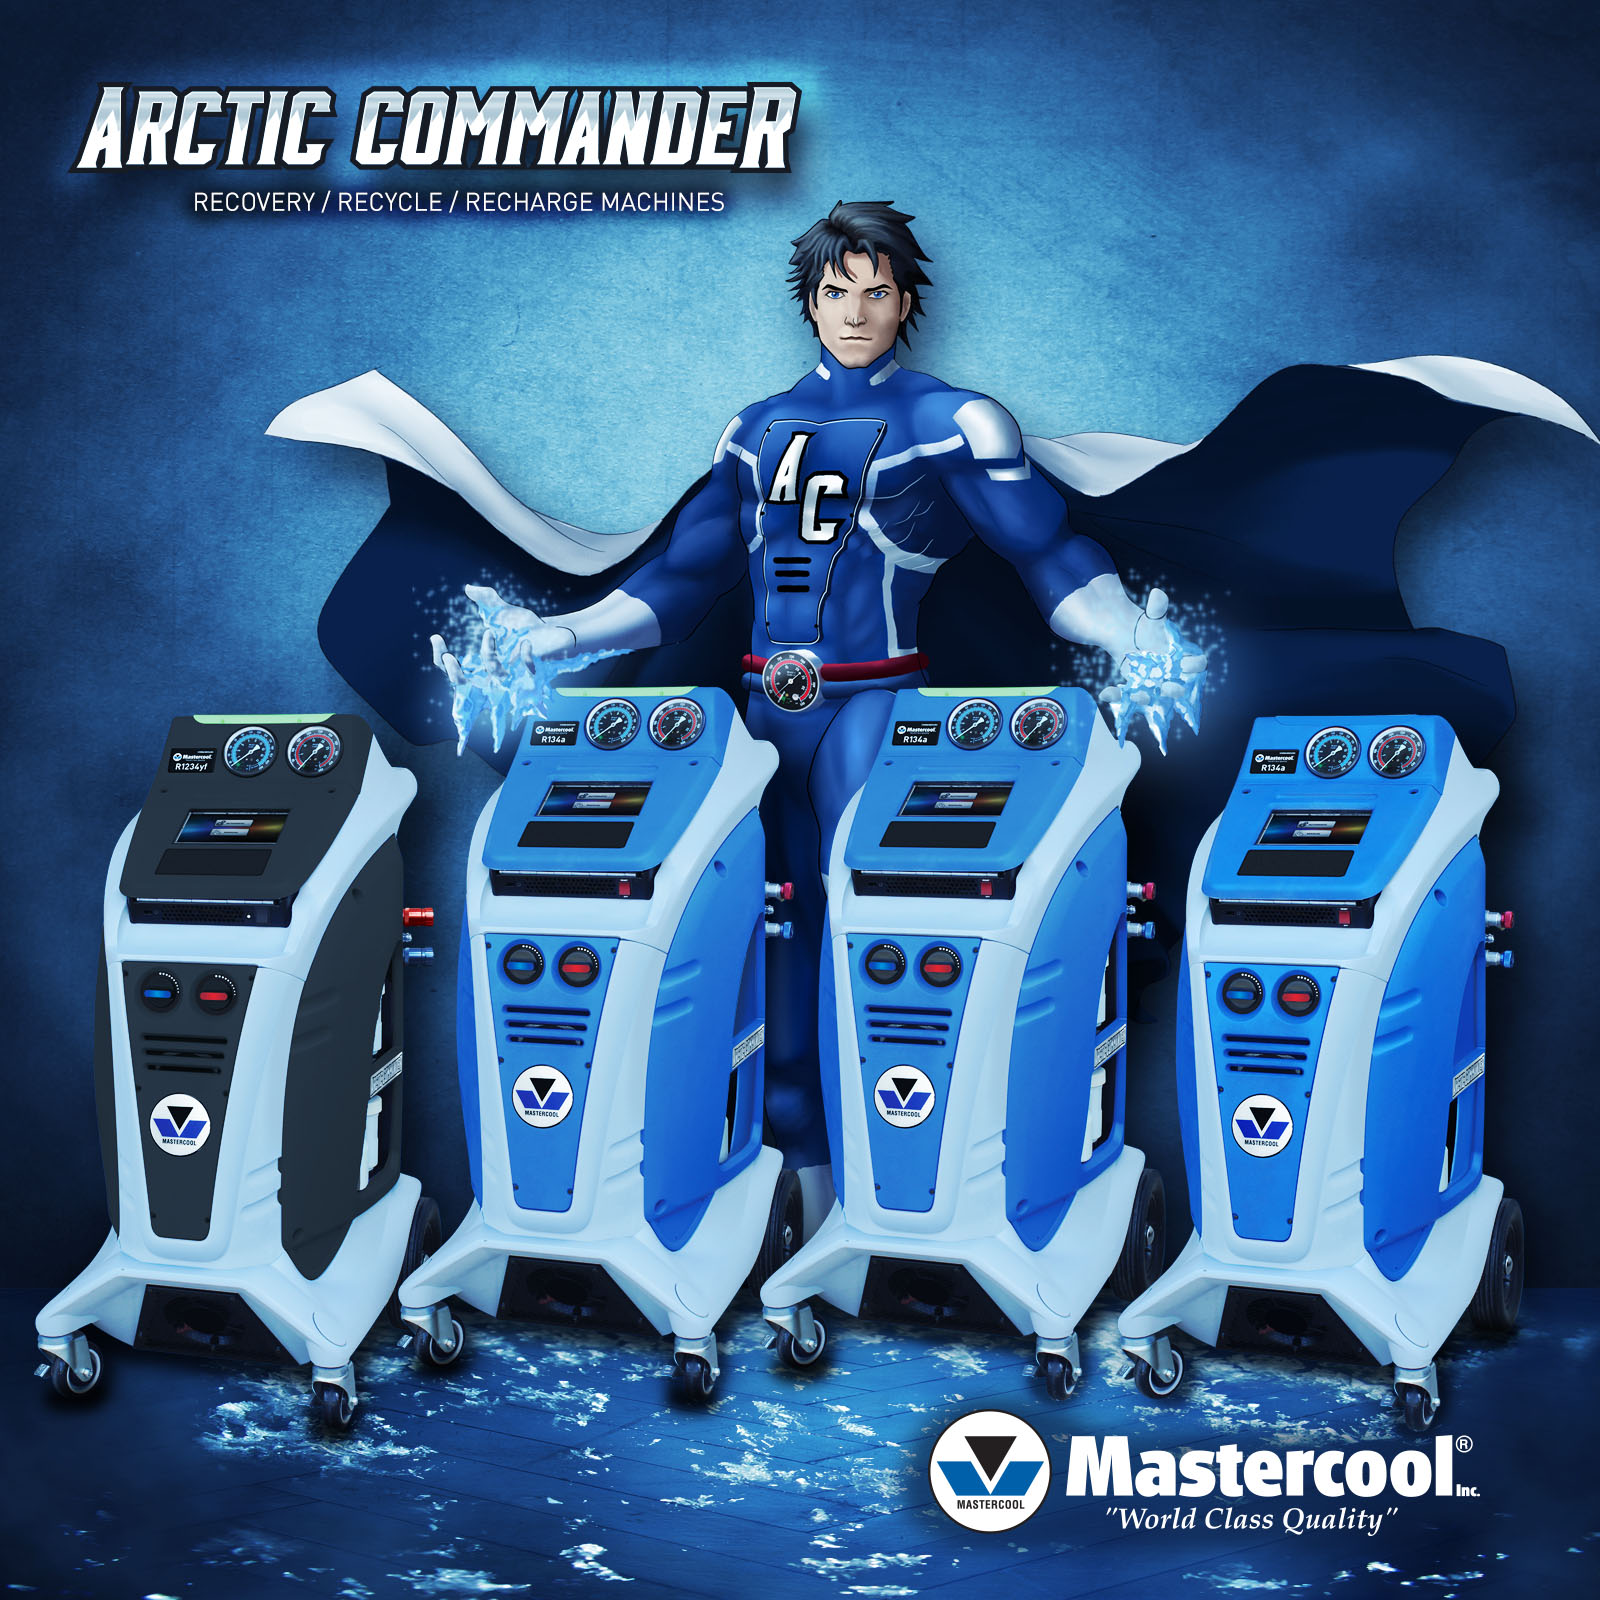 Mastercool Commander4000 Recover/Recycle/Recharge Machine R1234yf And Hybrid 